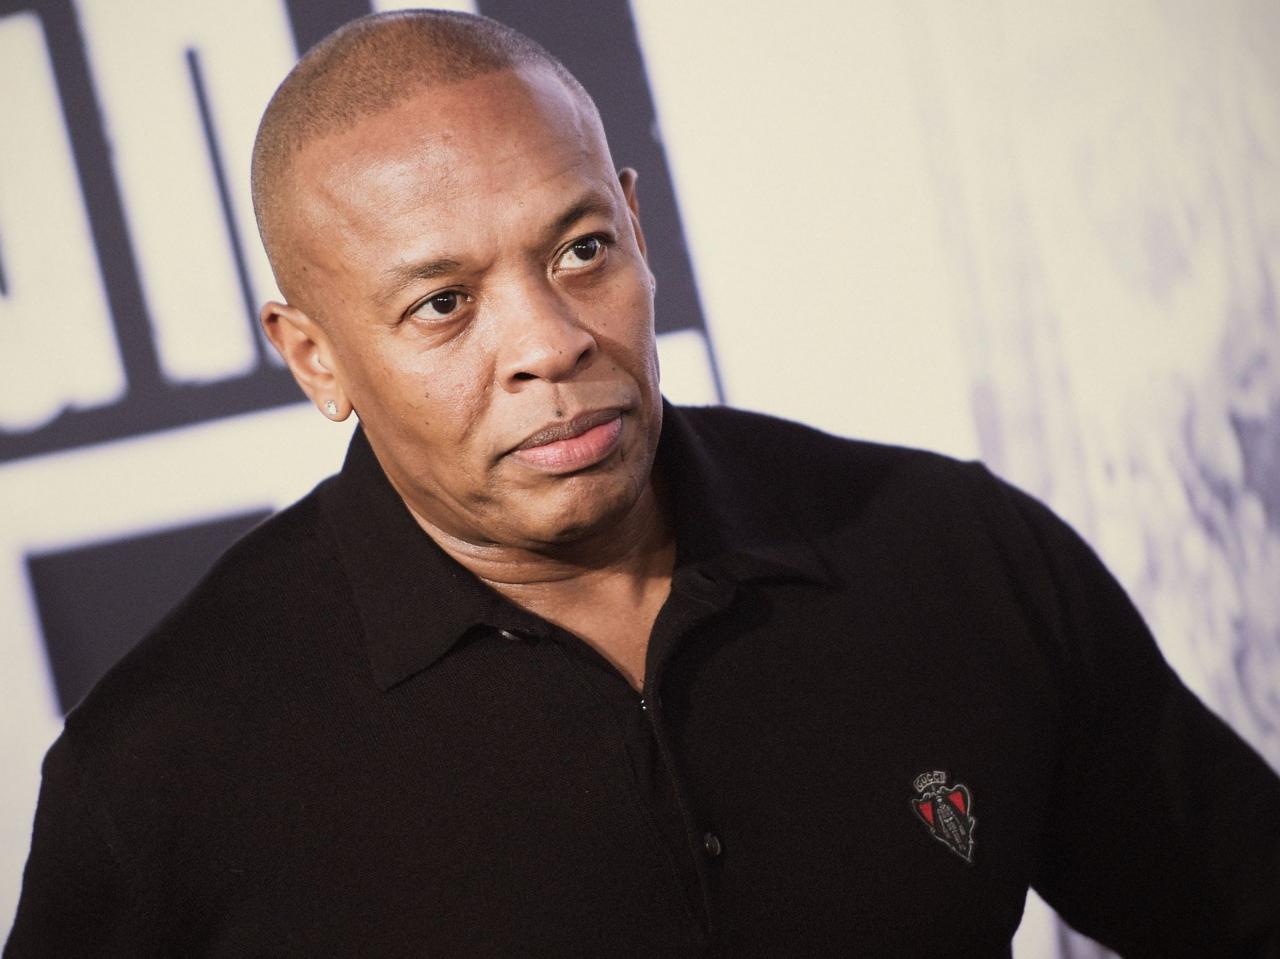 Dr. Dre set to complete deal to sell his music for $200 Million